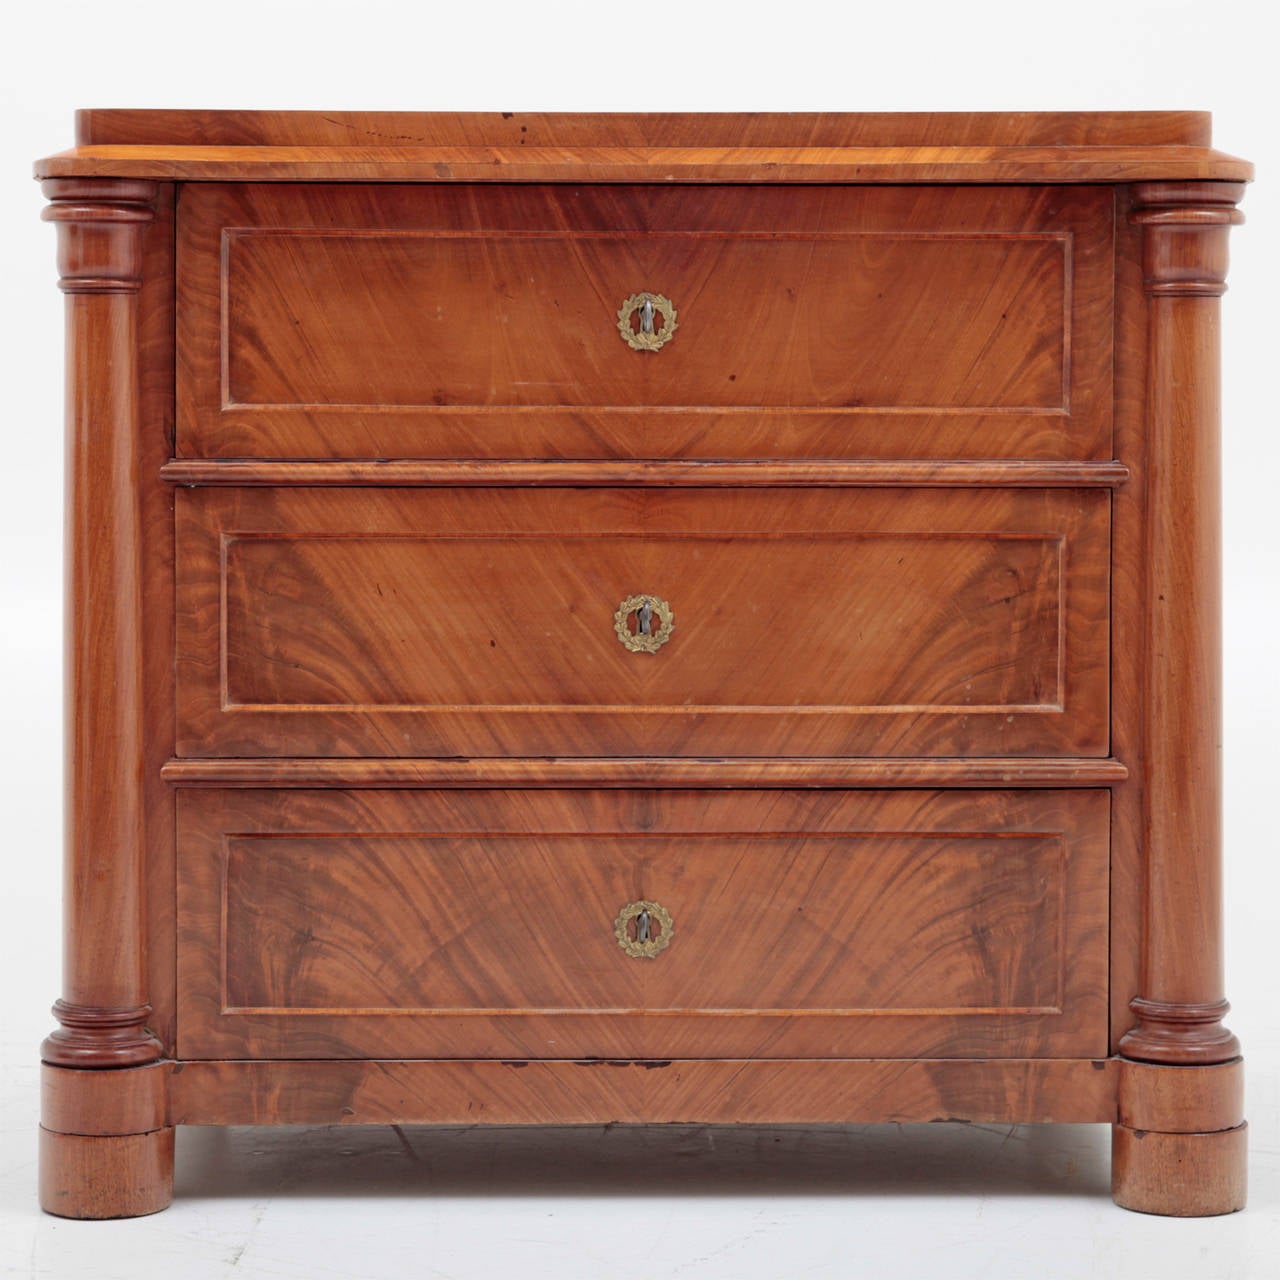 The chest has three drawers, each with a coffered front and round brass escutcheons. The front two feet are cylindrical, the rear two are square. The front corners are decorated with three-quarter columns. The upper edge is slightly protruding while